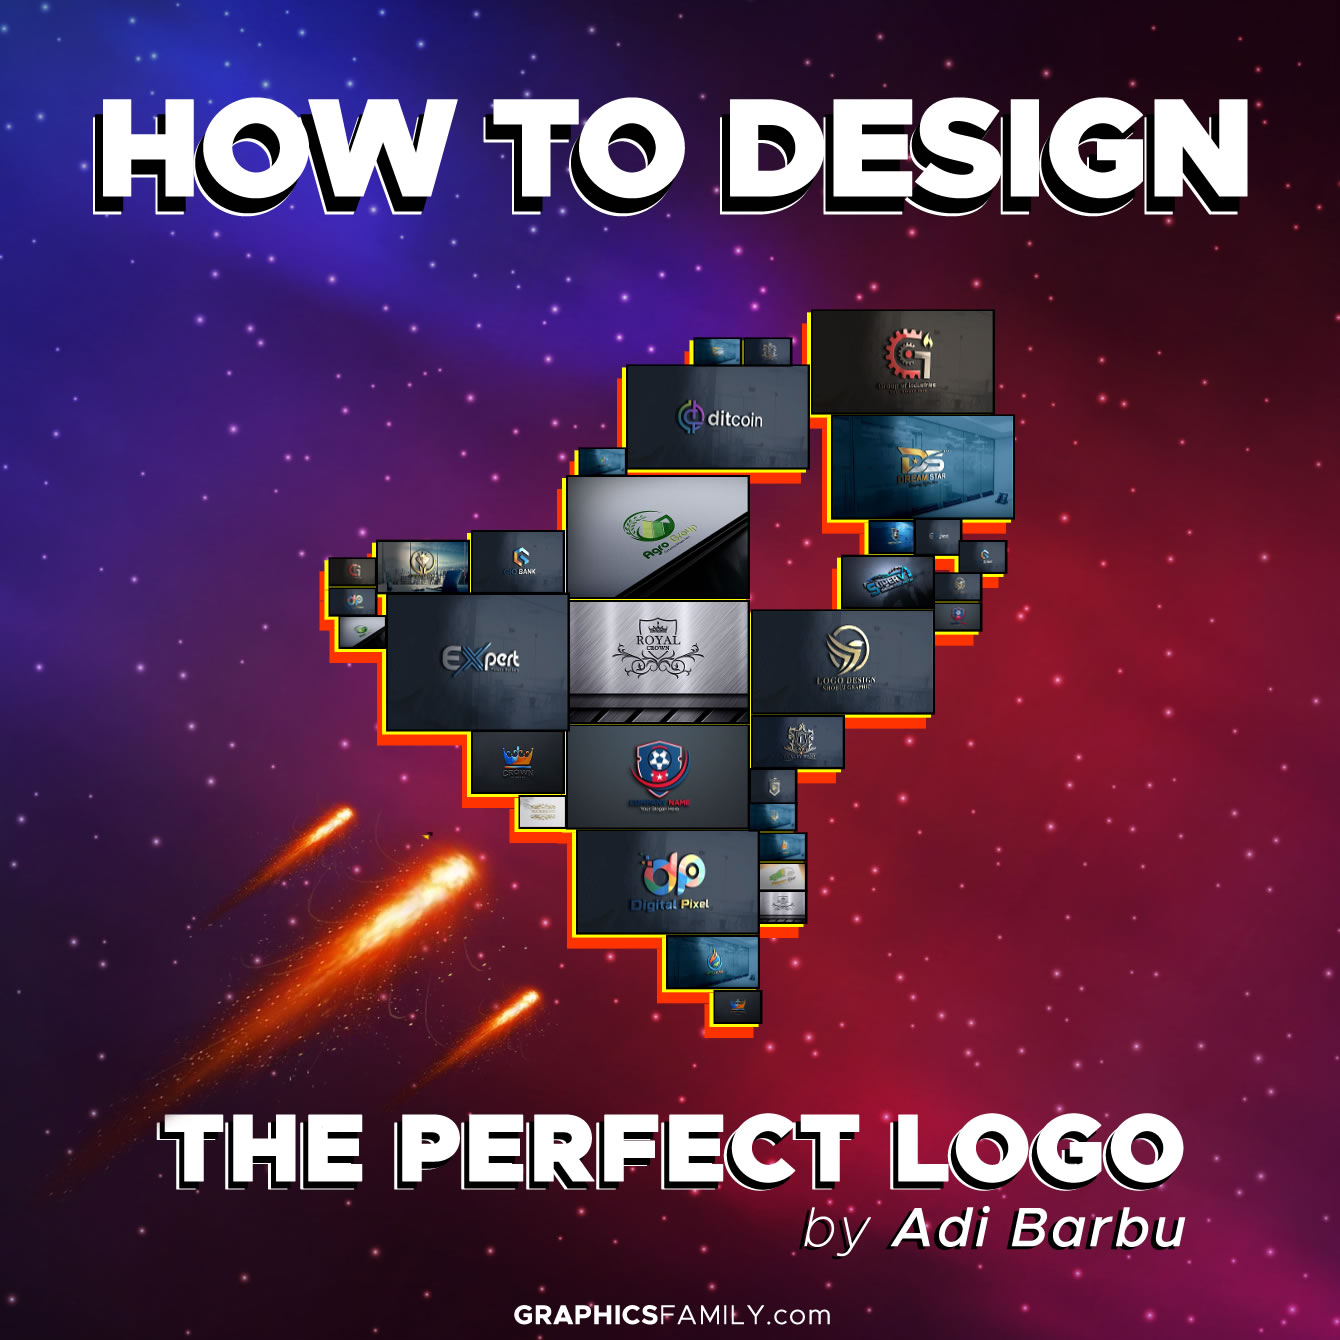 Step-by-Step Guide to Designing the Perfect Logo